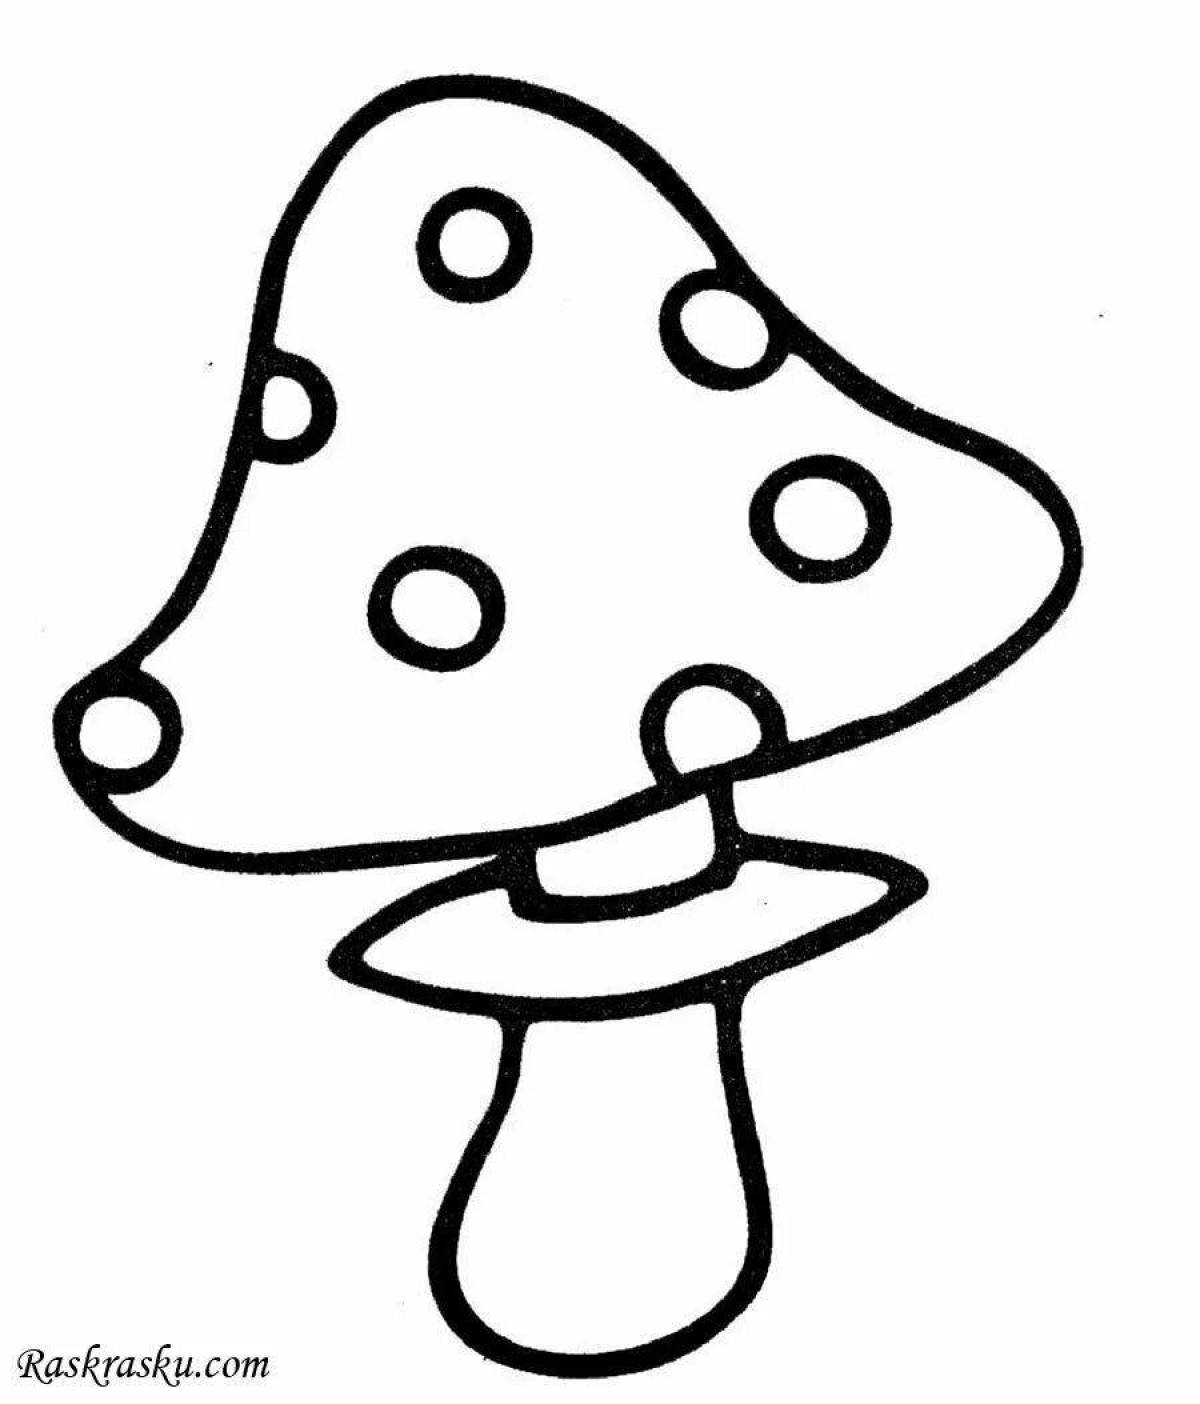 A wonderful fly agaric coloring book